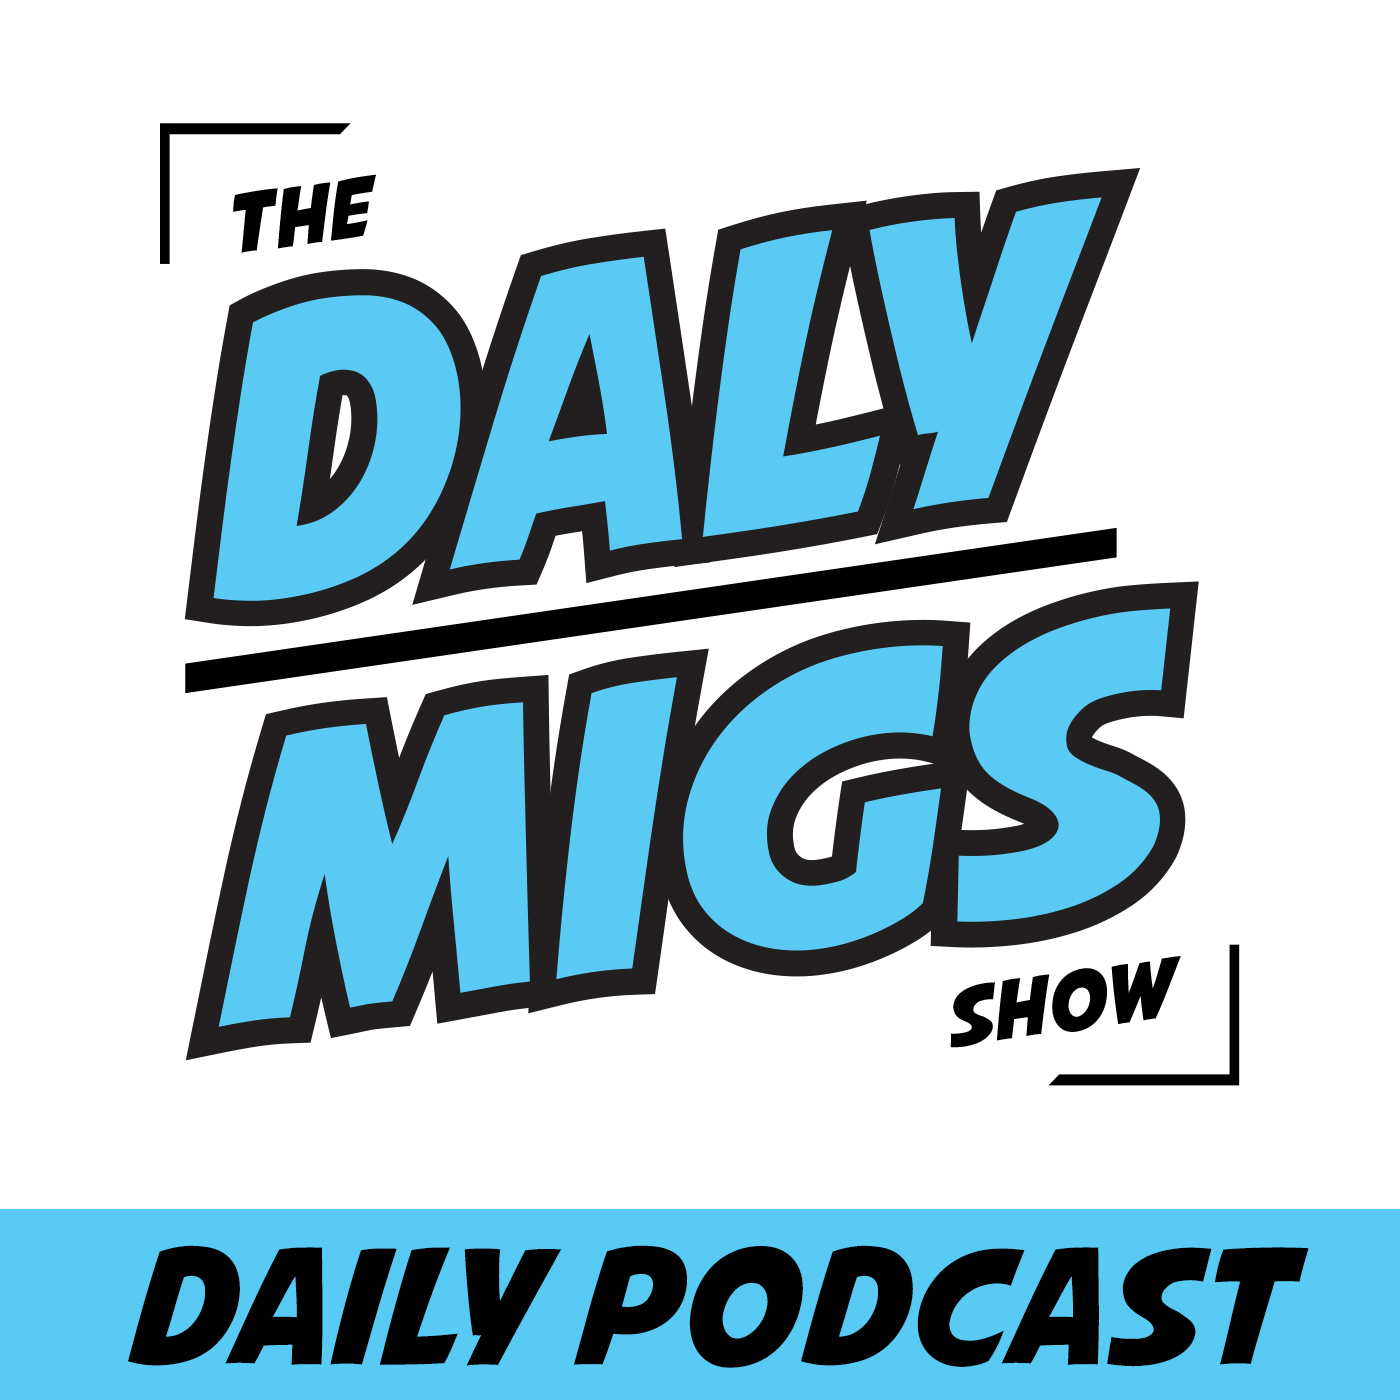 Daily Podcast pt. 3 - "It's a Mariner's Straight to the Comments!"